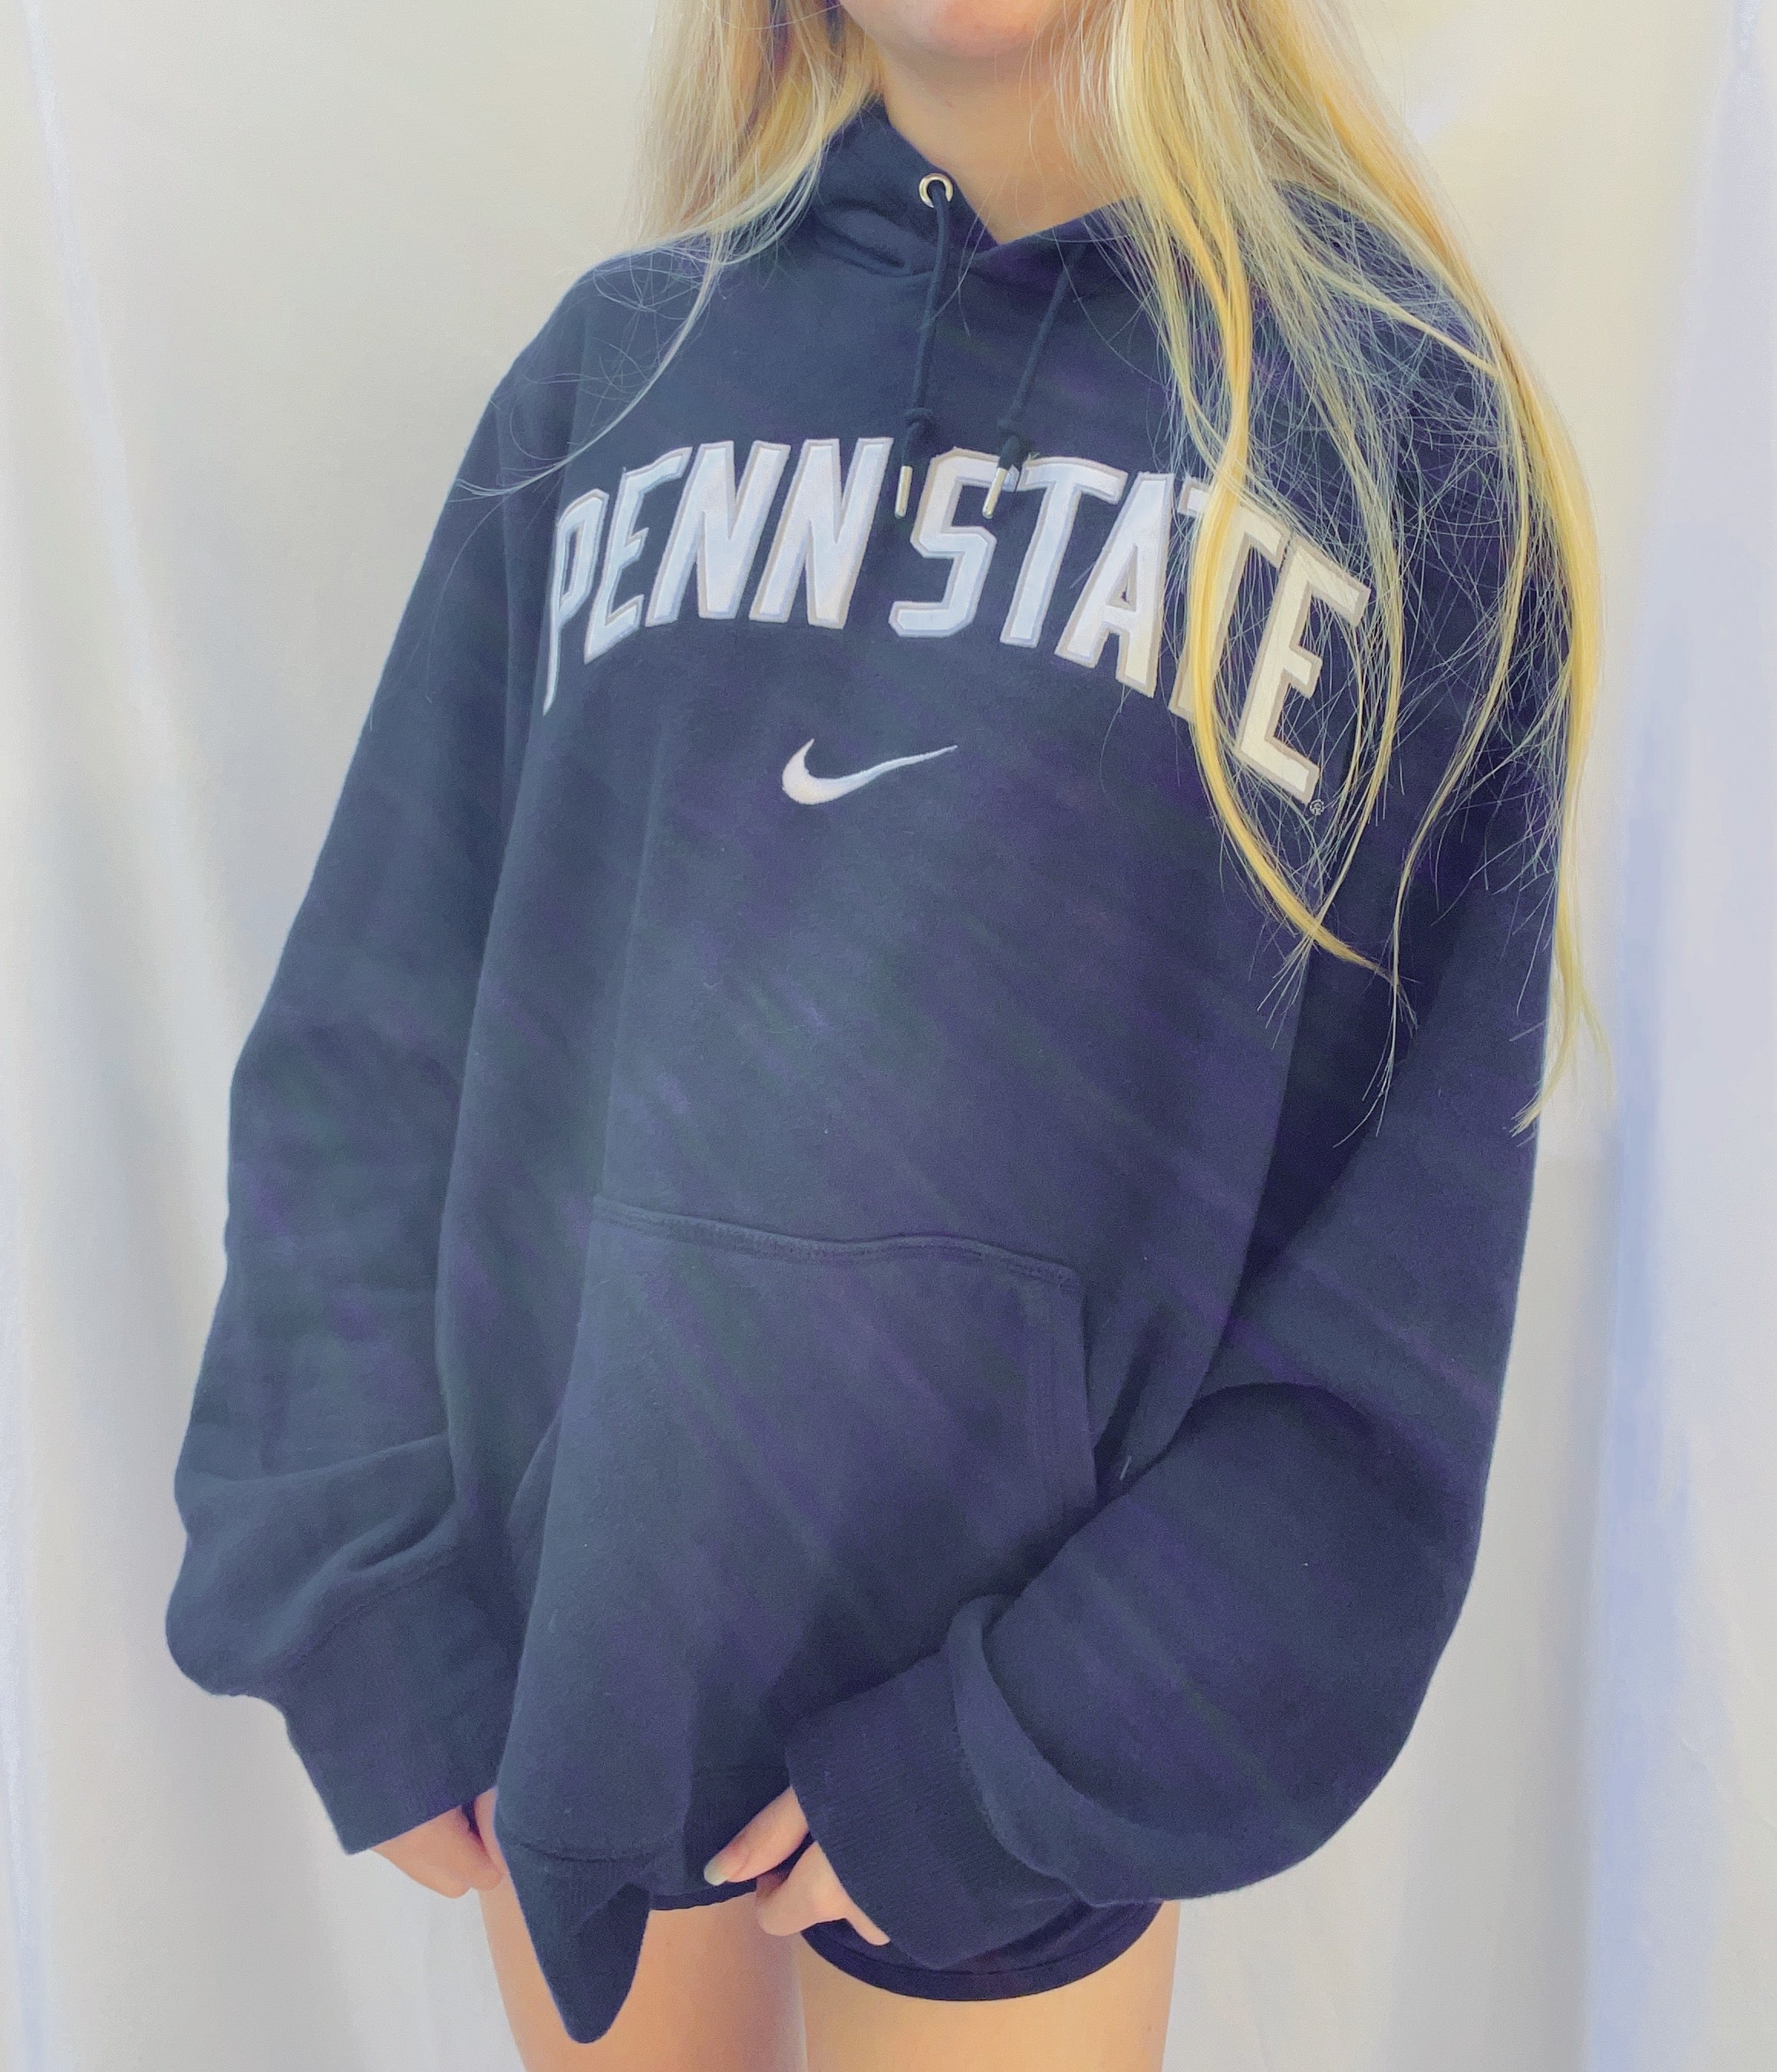 L) Stanford Nike Hoodie – Happyy.thrifts